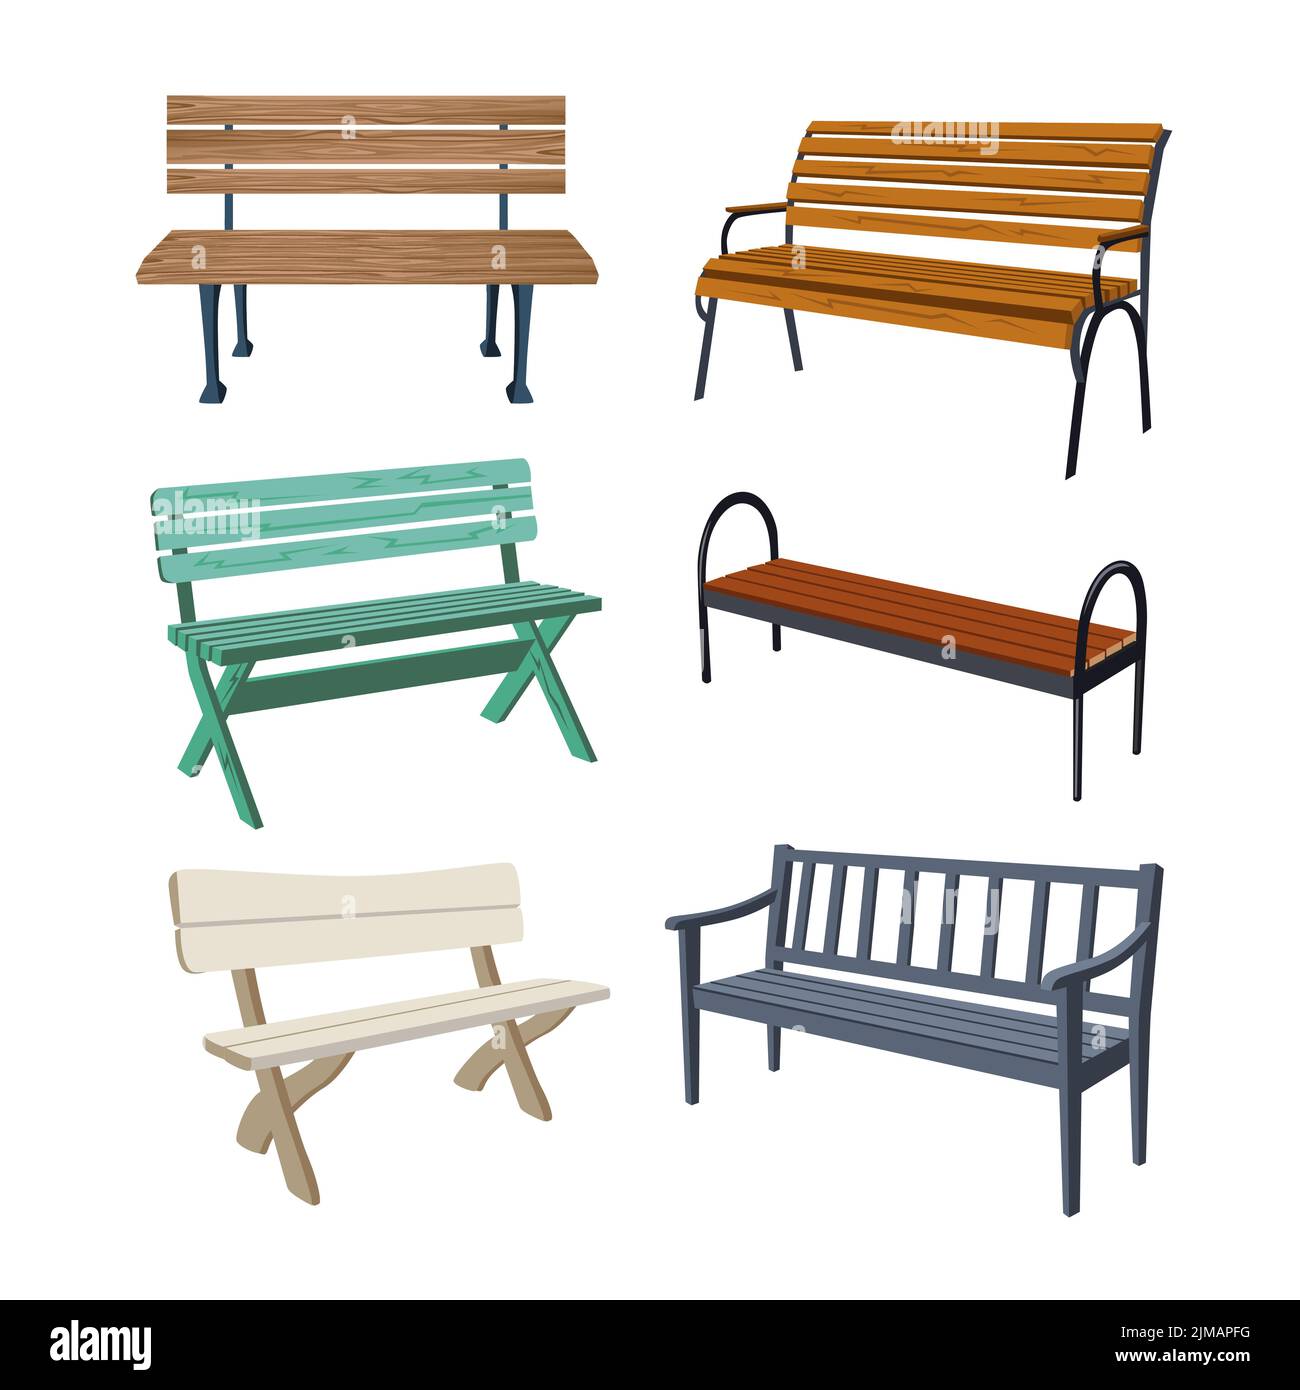 Various wooden park benches cartoon illustration set. Colorful garden or city benches for outdoor relaxation or public spaces decoration. Furniture, u Stock Vector